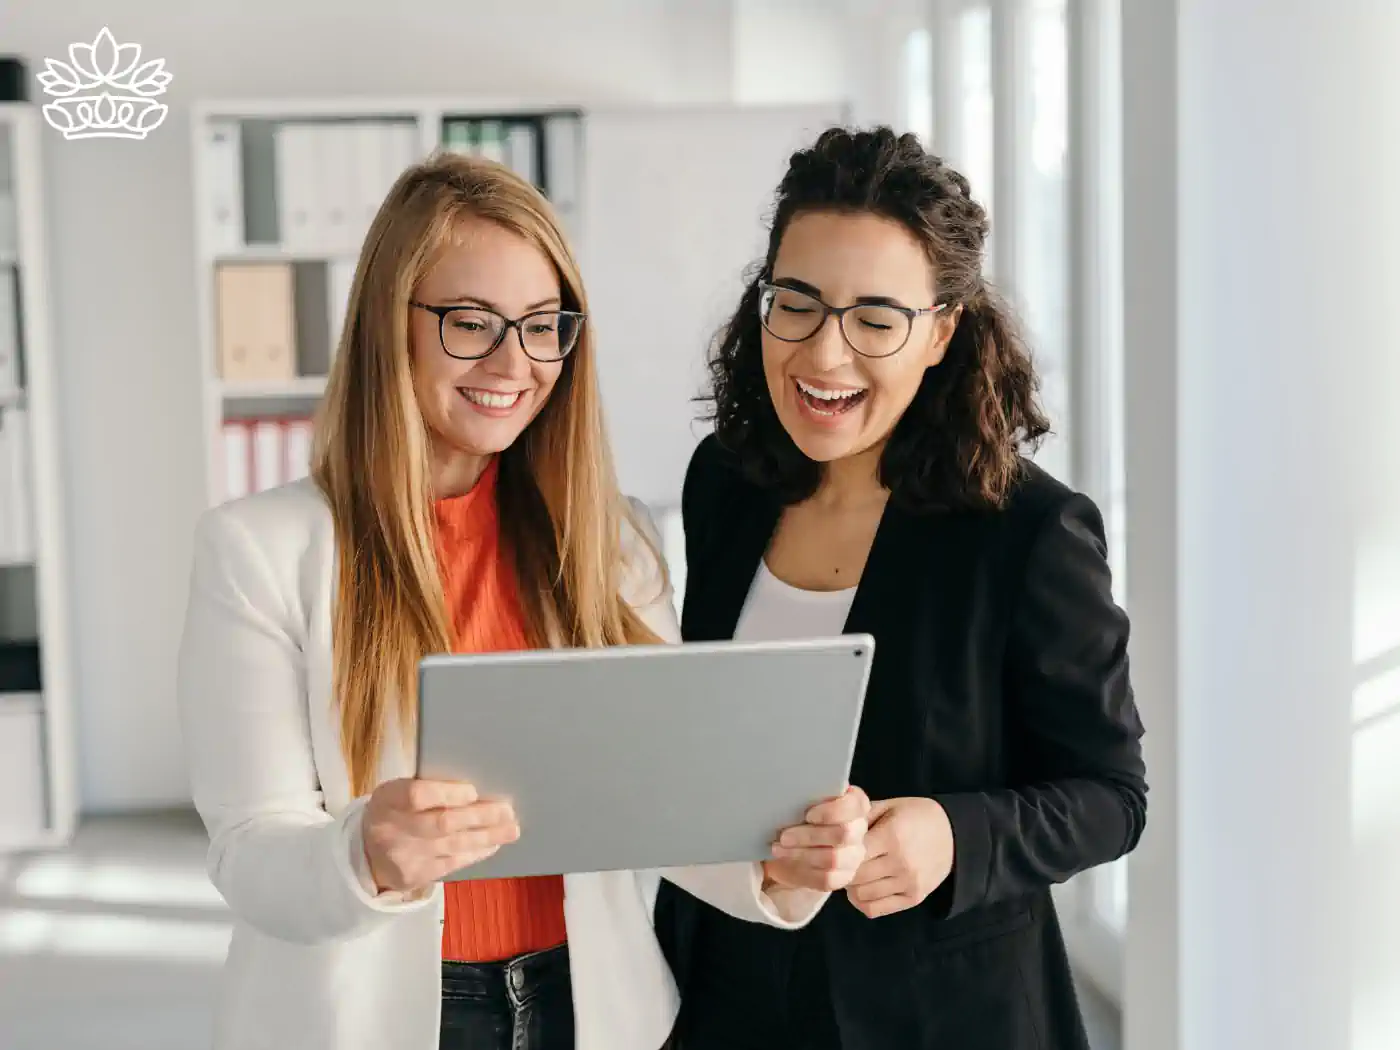 Two professional women in a bright office setting, smiling joyfully as they look at a tablet together, sharing a positive work-related experience. They are stylishly dressed, embodying a sense of partnership and success. Gift boxes for colleagues, delivered with heart by Fabulous Flowers and Gifts